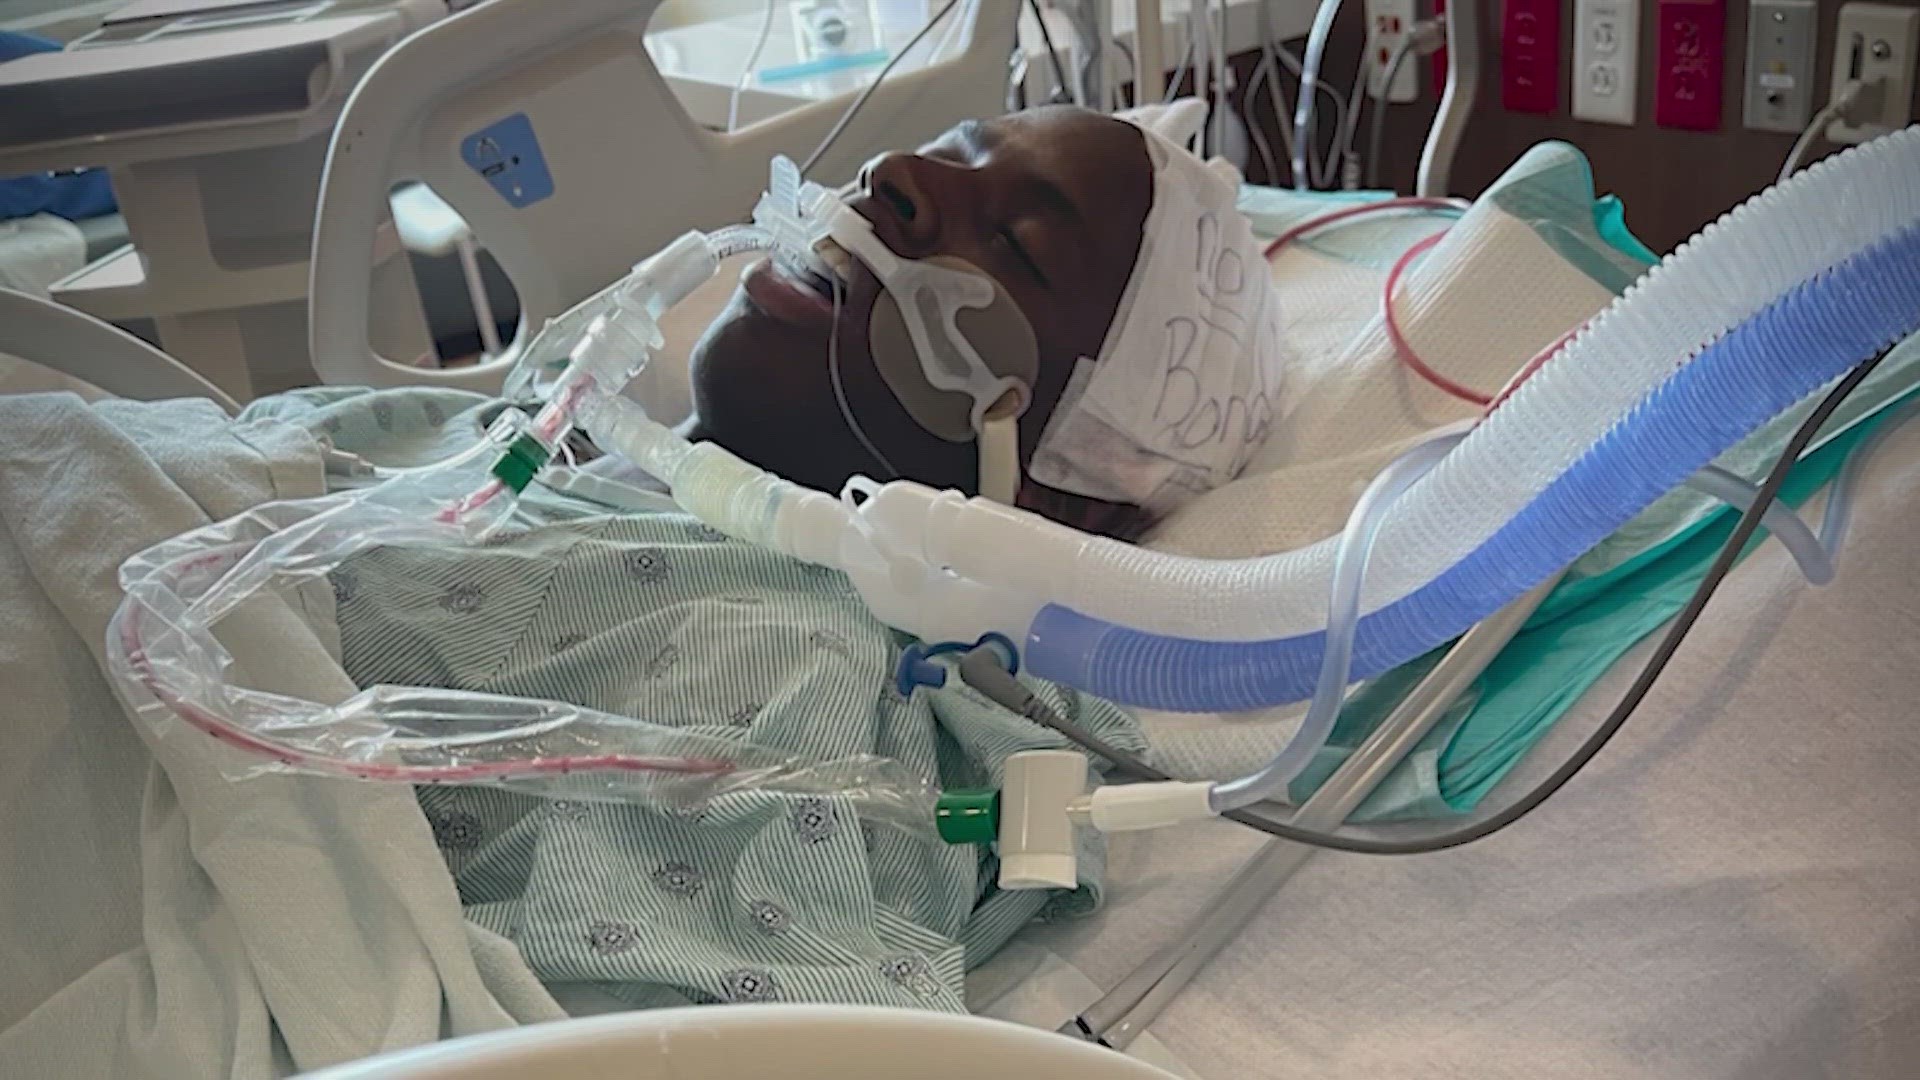 "They had to cut half his skull," one victim's parents said. "He's on life support."